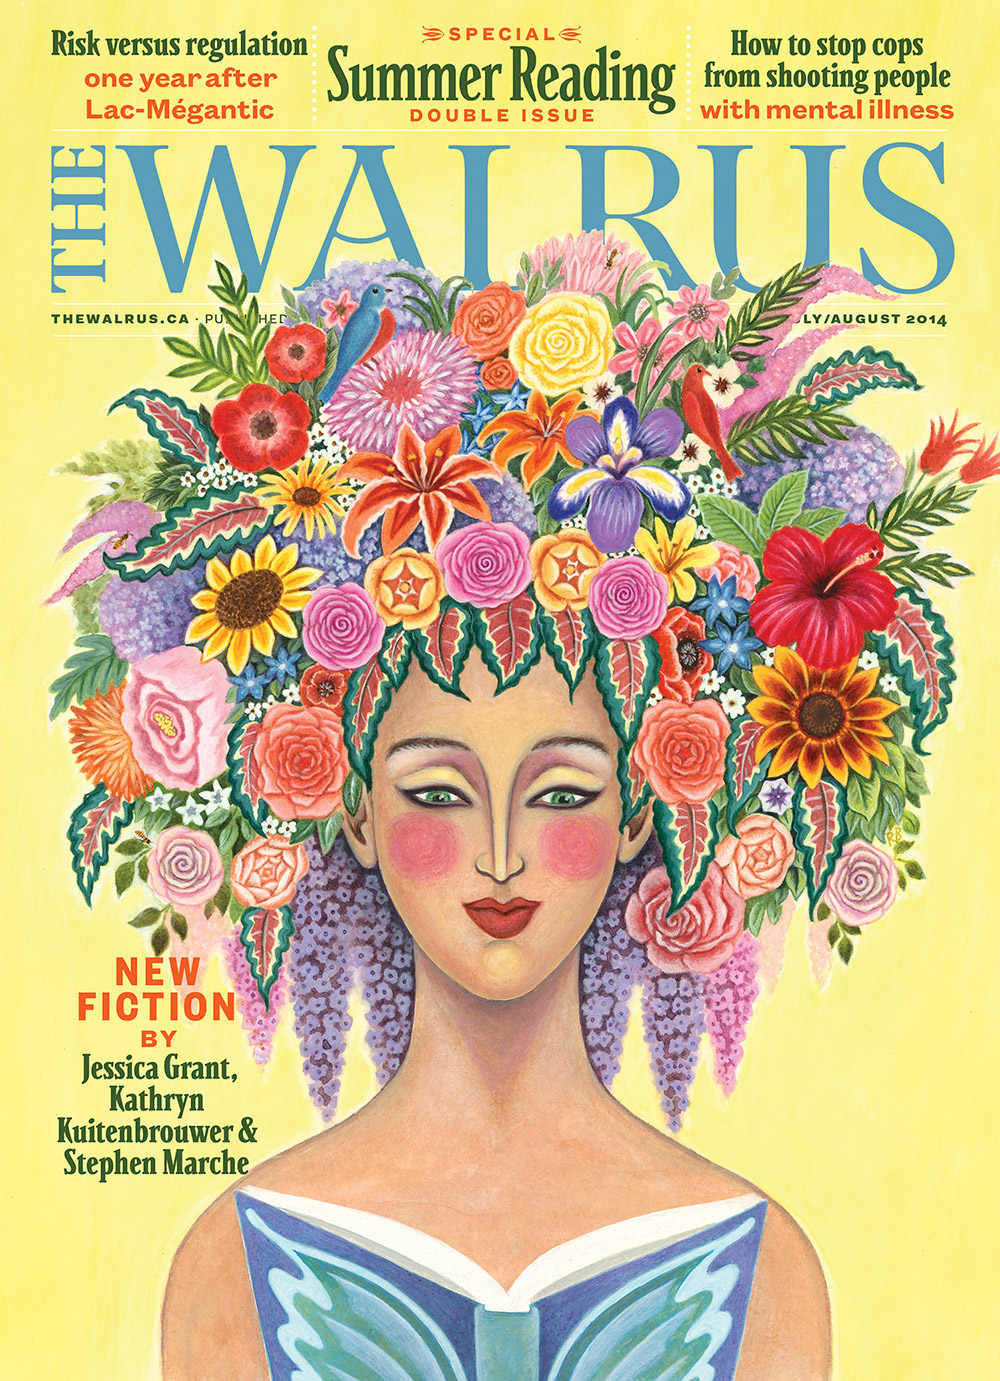 Cover of The Walrus magazine featuring a woman with a colourful bouquet of flowers as hair reading a book in front of a yellow background. The Walrus wordmark is in blue at the top and the main headline reads 'Summer Reading.'